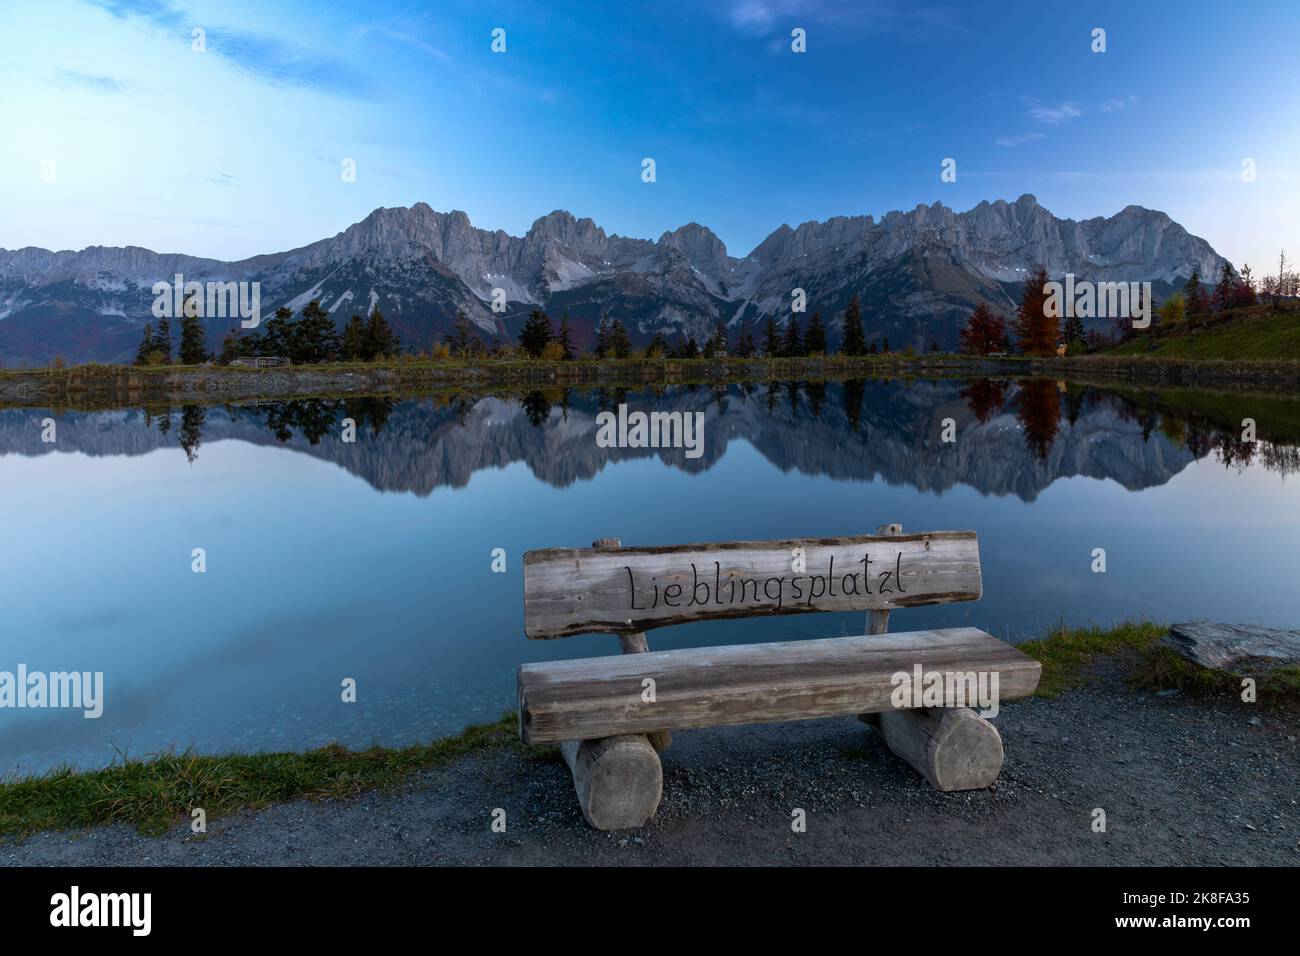 Lieblingsplatzl, favorite place, bench at lake Astbergsee with Wilder Kaiser mountains reflected, Going, Tyrol, Austria Stock Photo